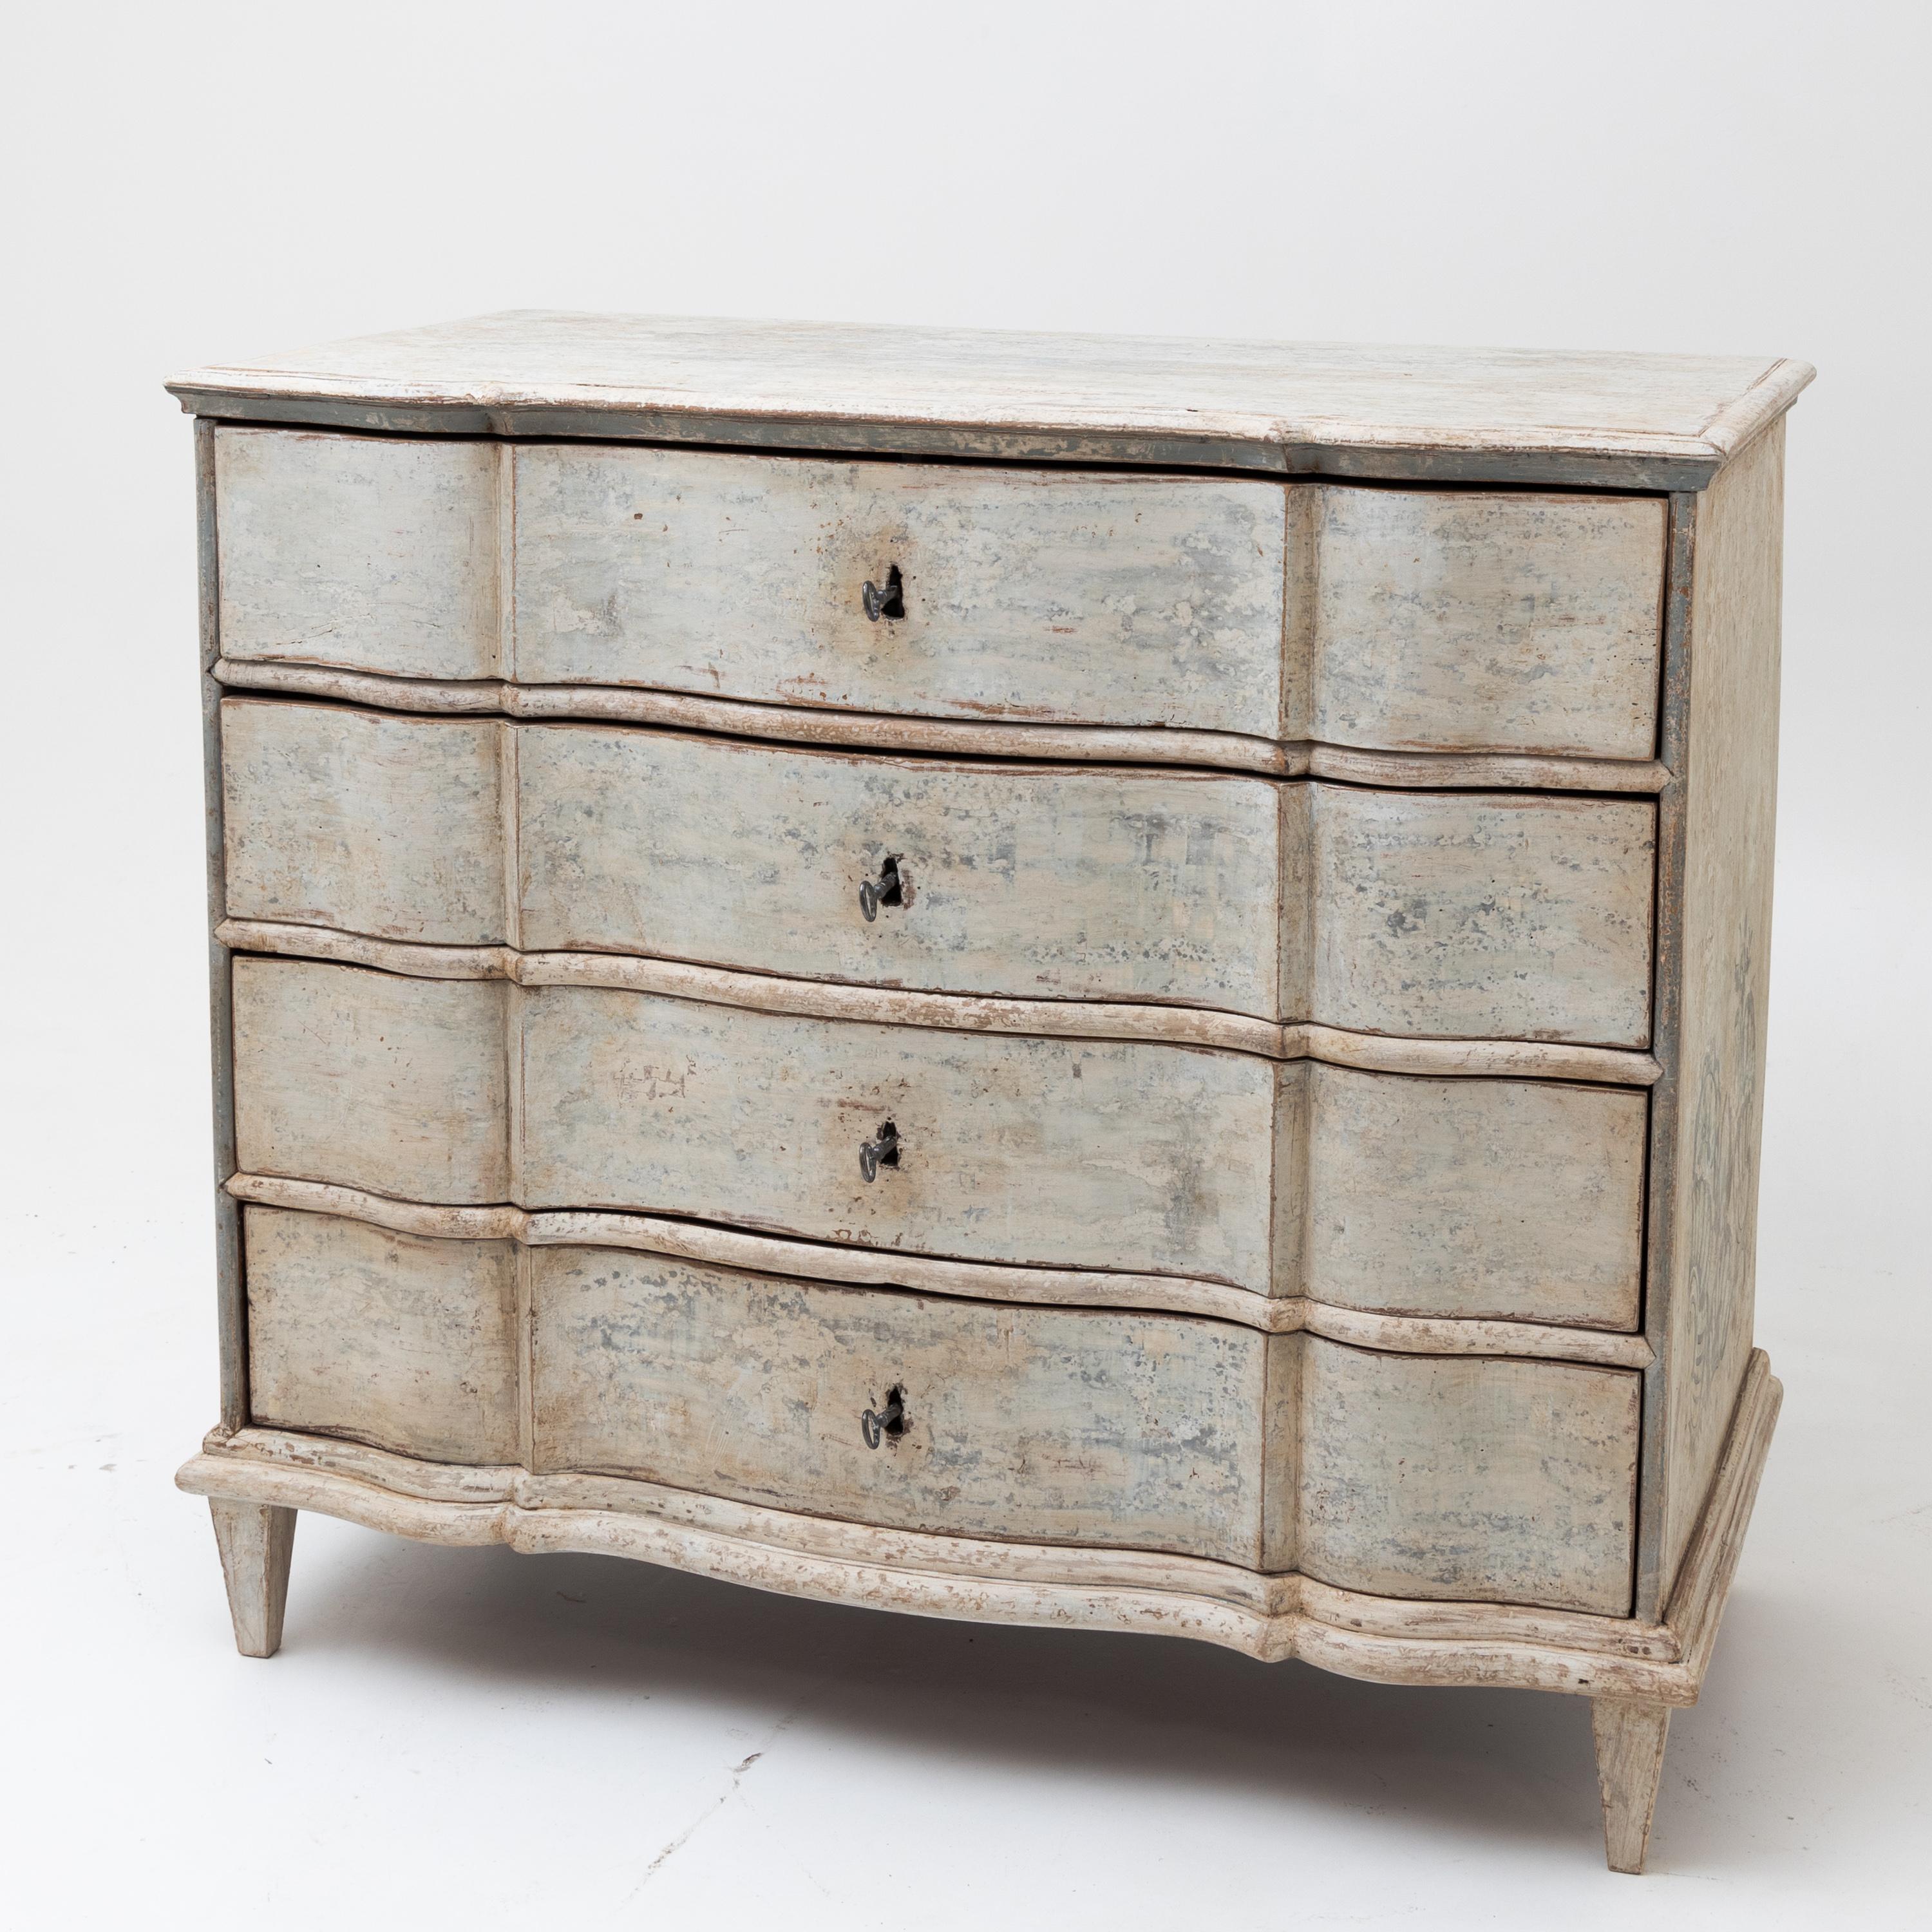 Baroque chest of drawers with four drawers on low square tapered feet with a wavy front and new stone-grey setting with shell decoration on the sides. The frame was subsequently patinated with an antique finish.